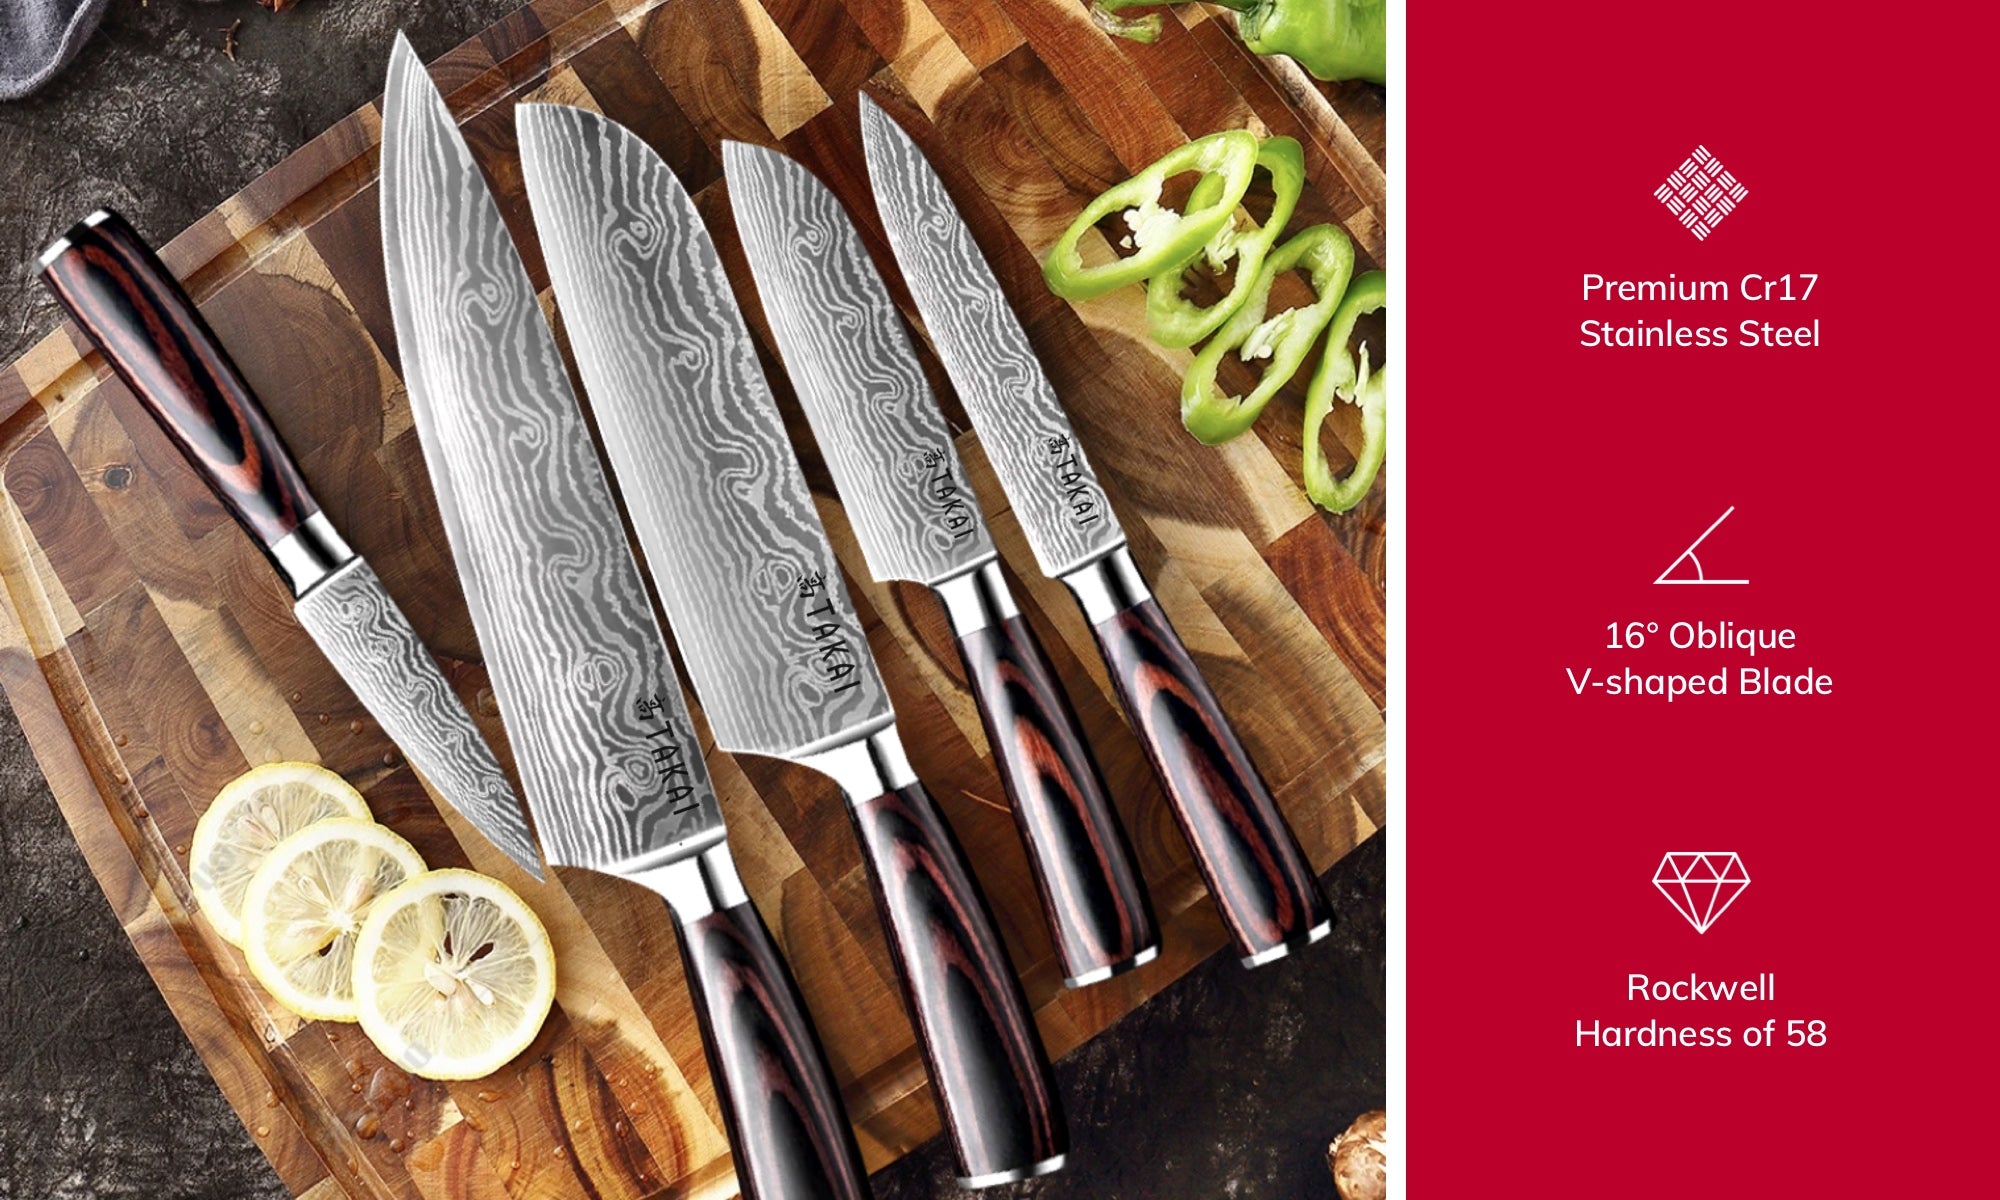 High Quality Affordable 5 Piece Red Pakkawood Chef Knife Set 